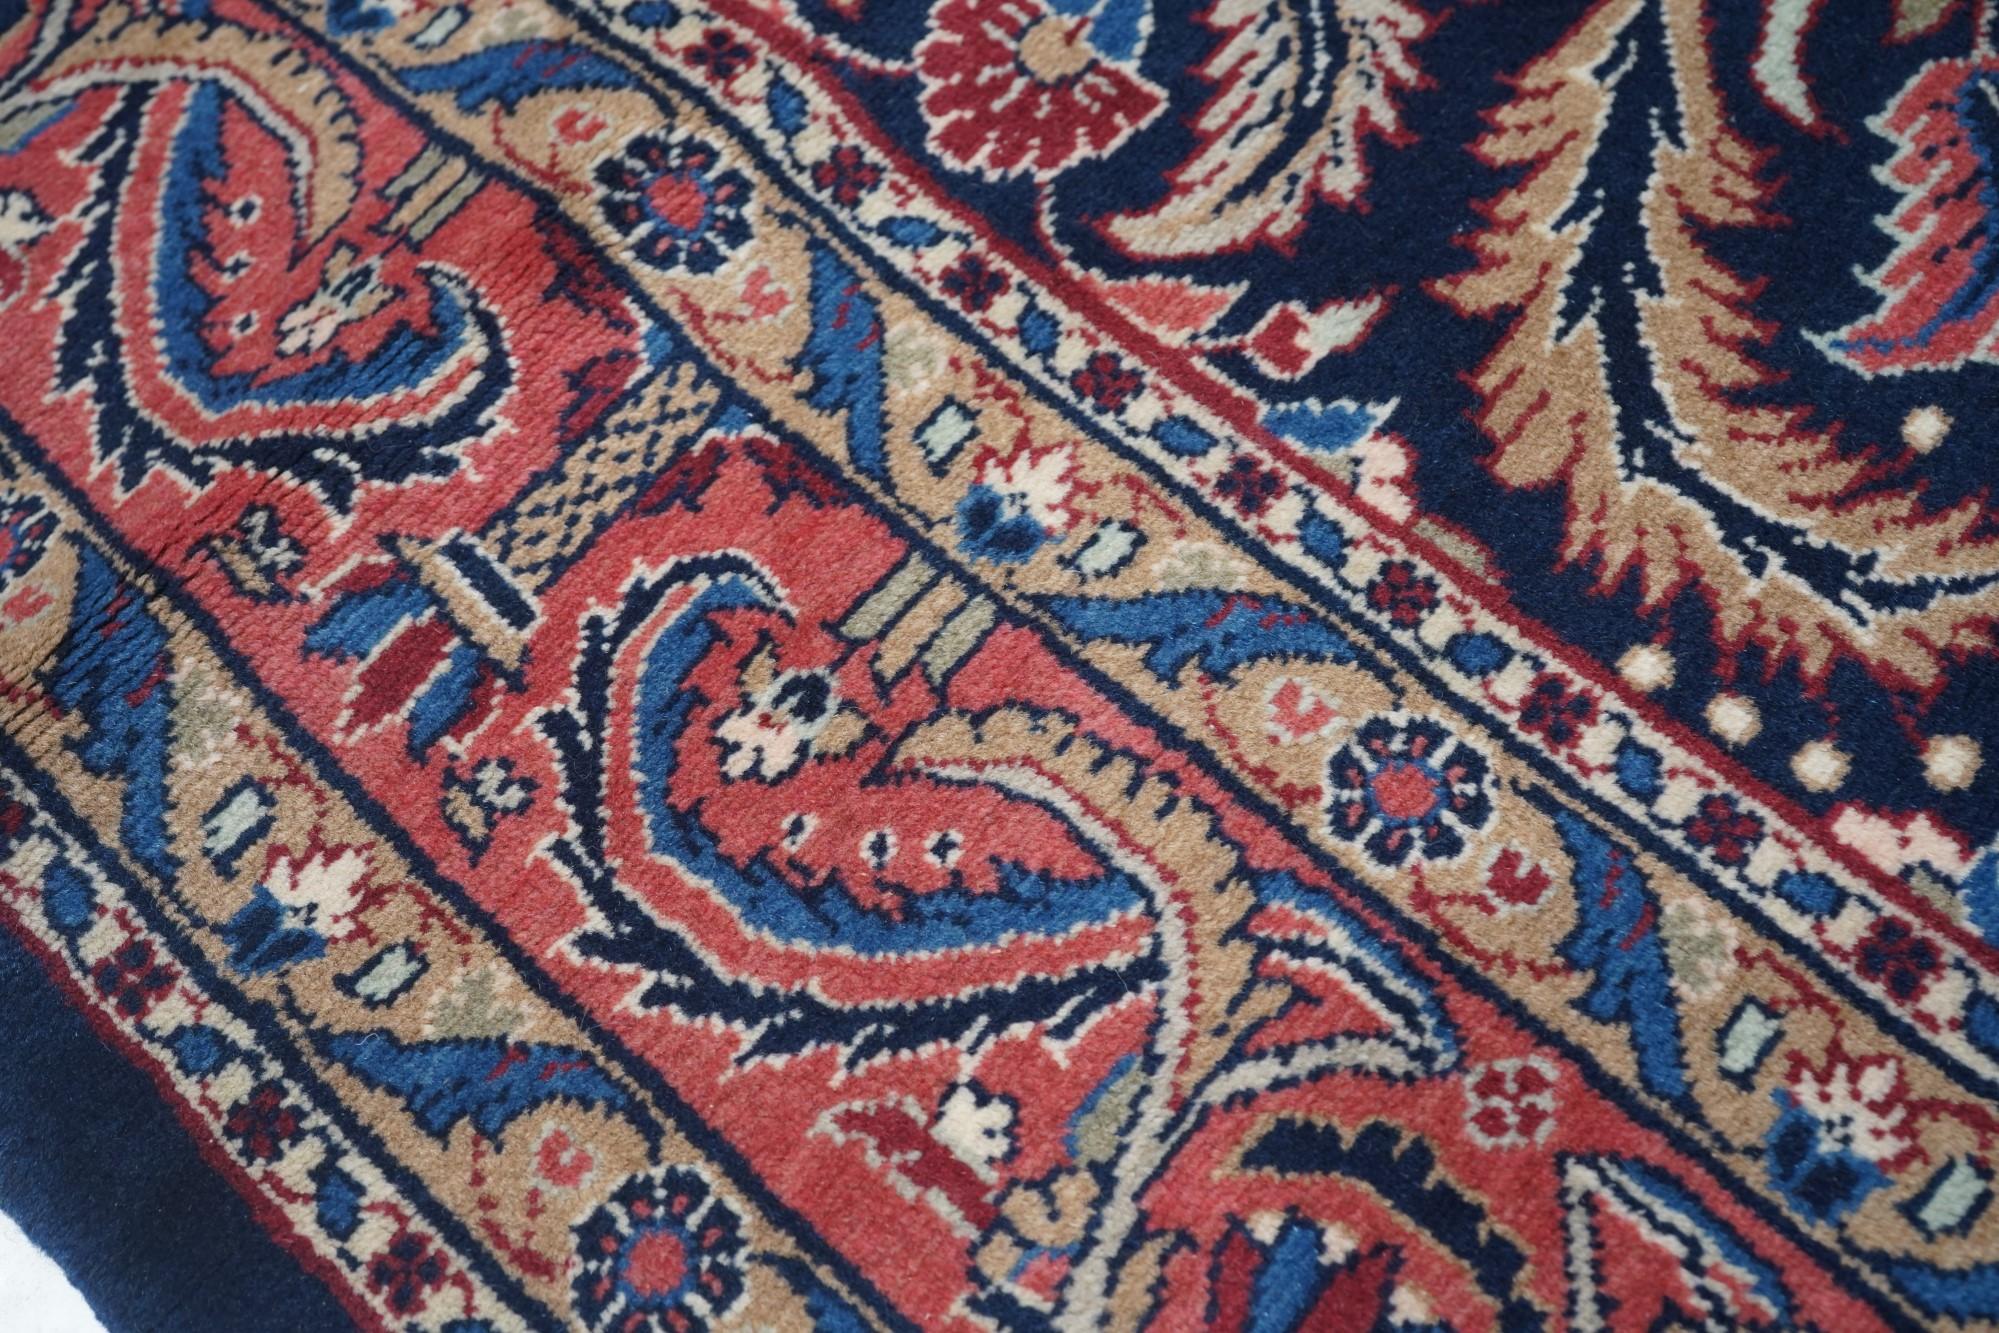 Vintage Lilihan Rug 6'6'' x 10'0'' In Excellent Condition For Sale In New York, NY